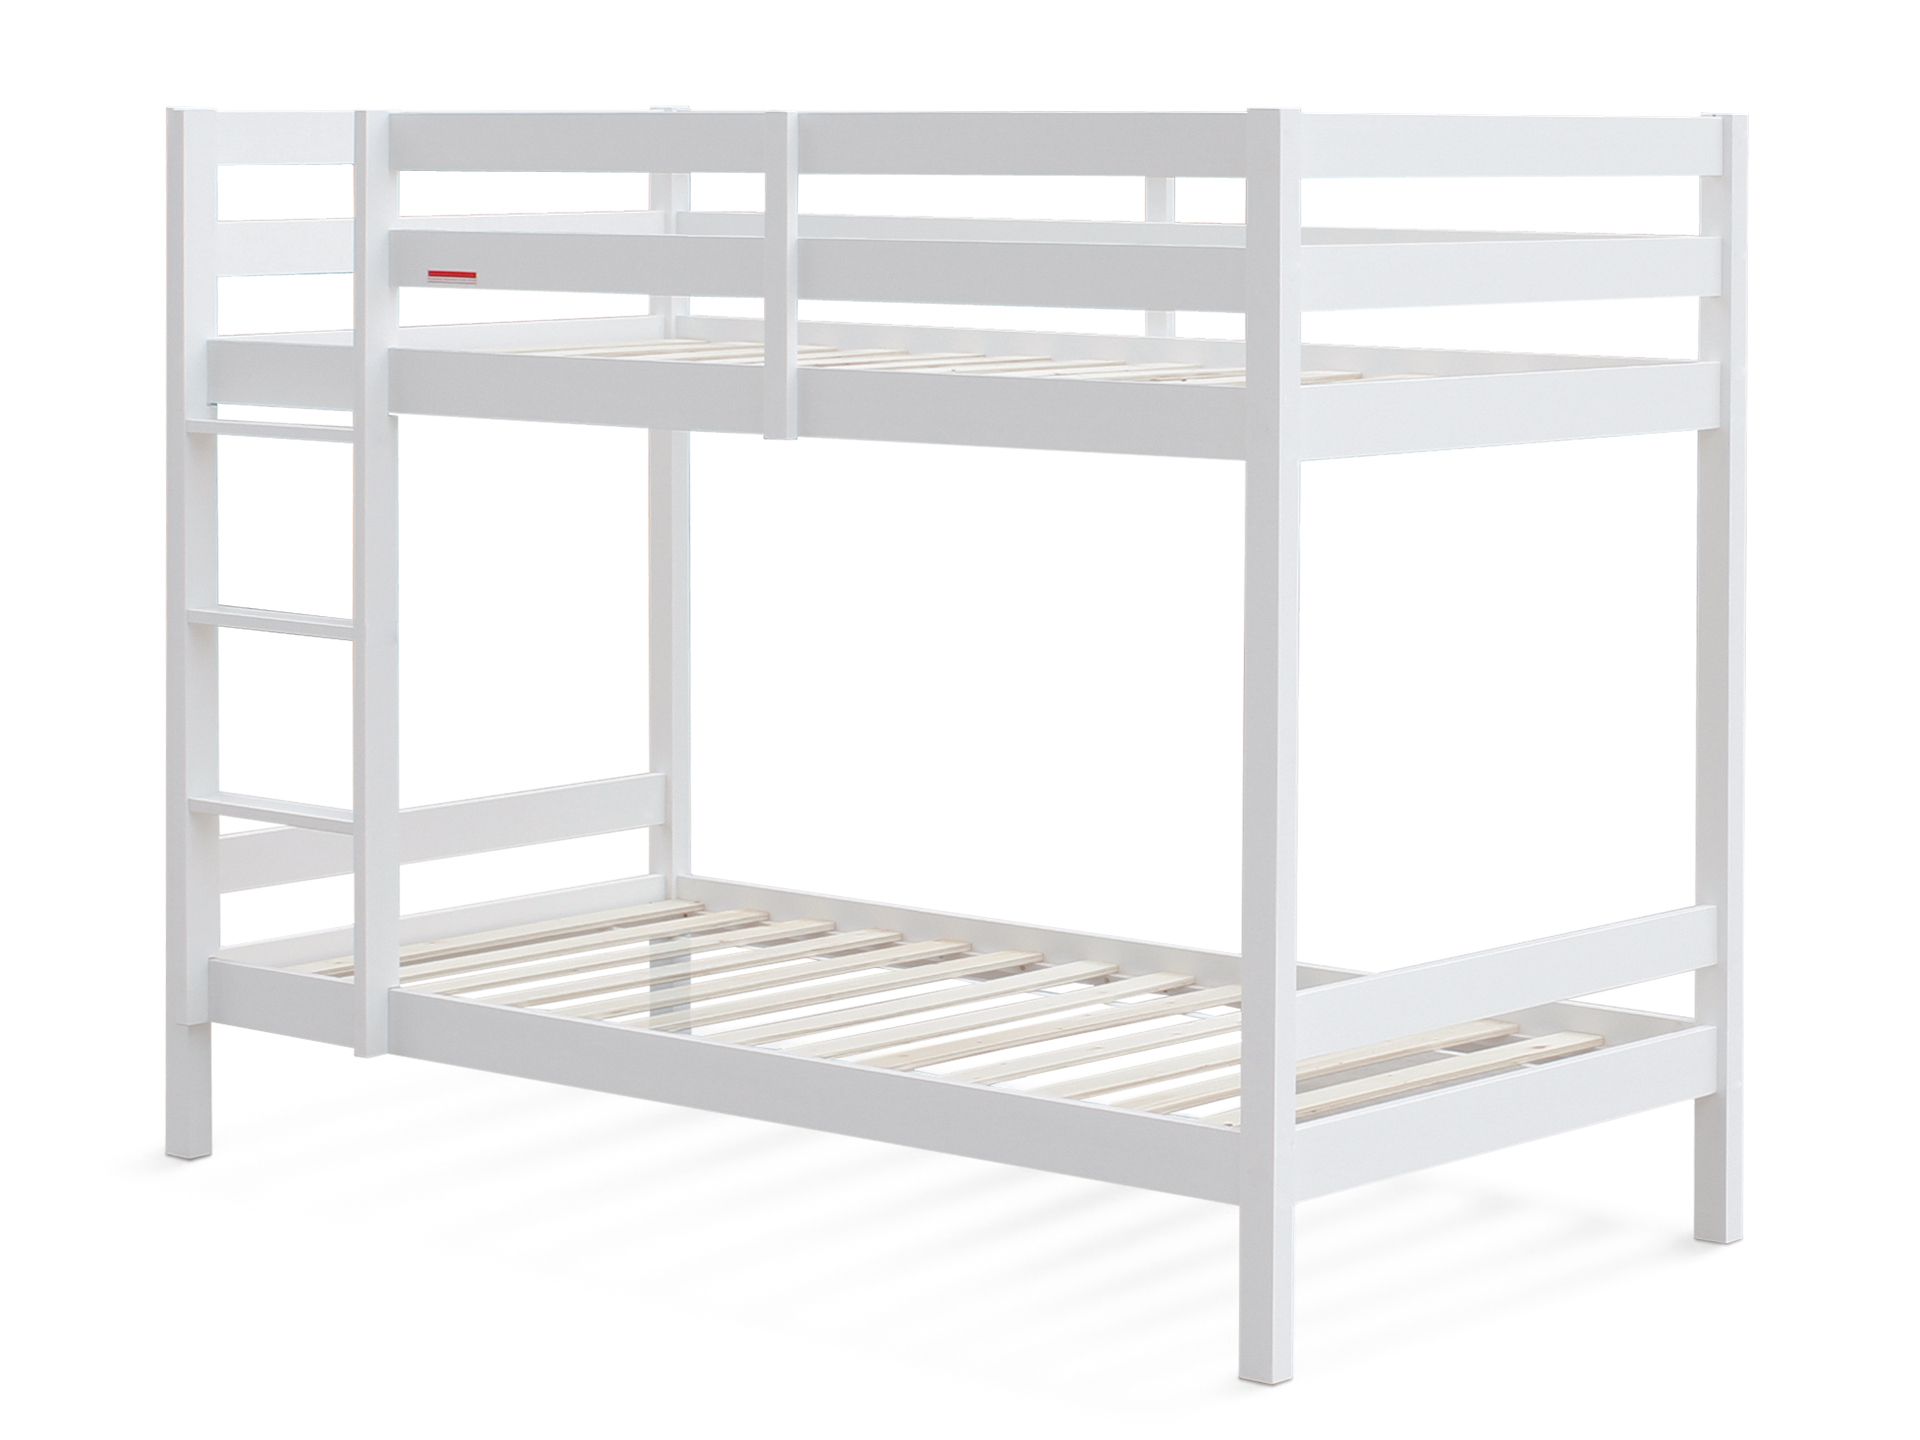 Maroon Single Wooden Bunk Bed Frame - White